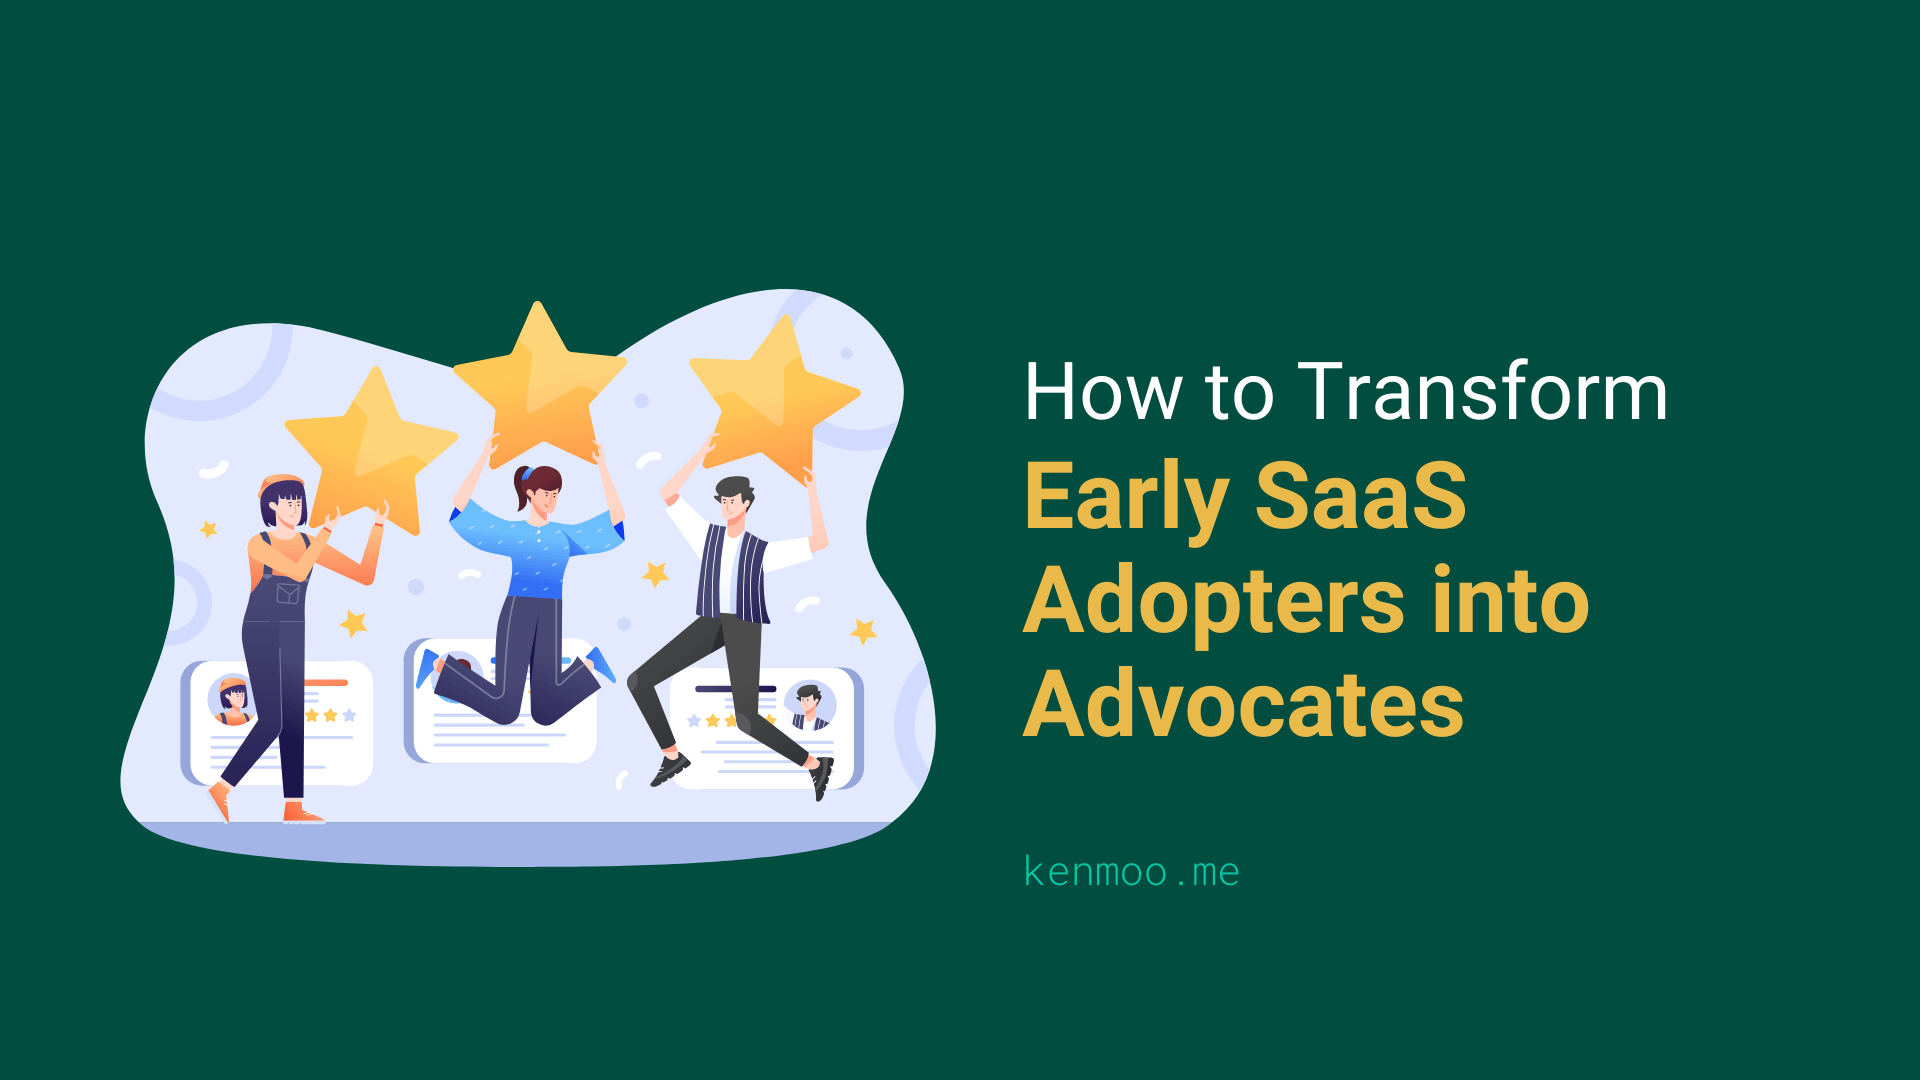 How to Transform Early SaaS Adopters into Advocates